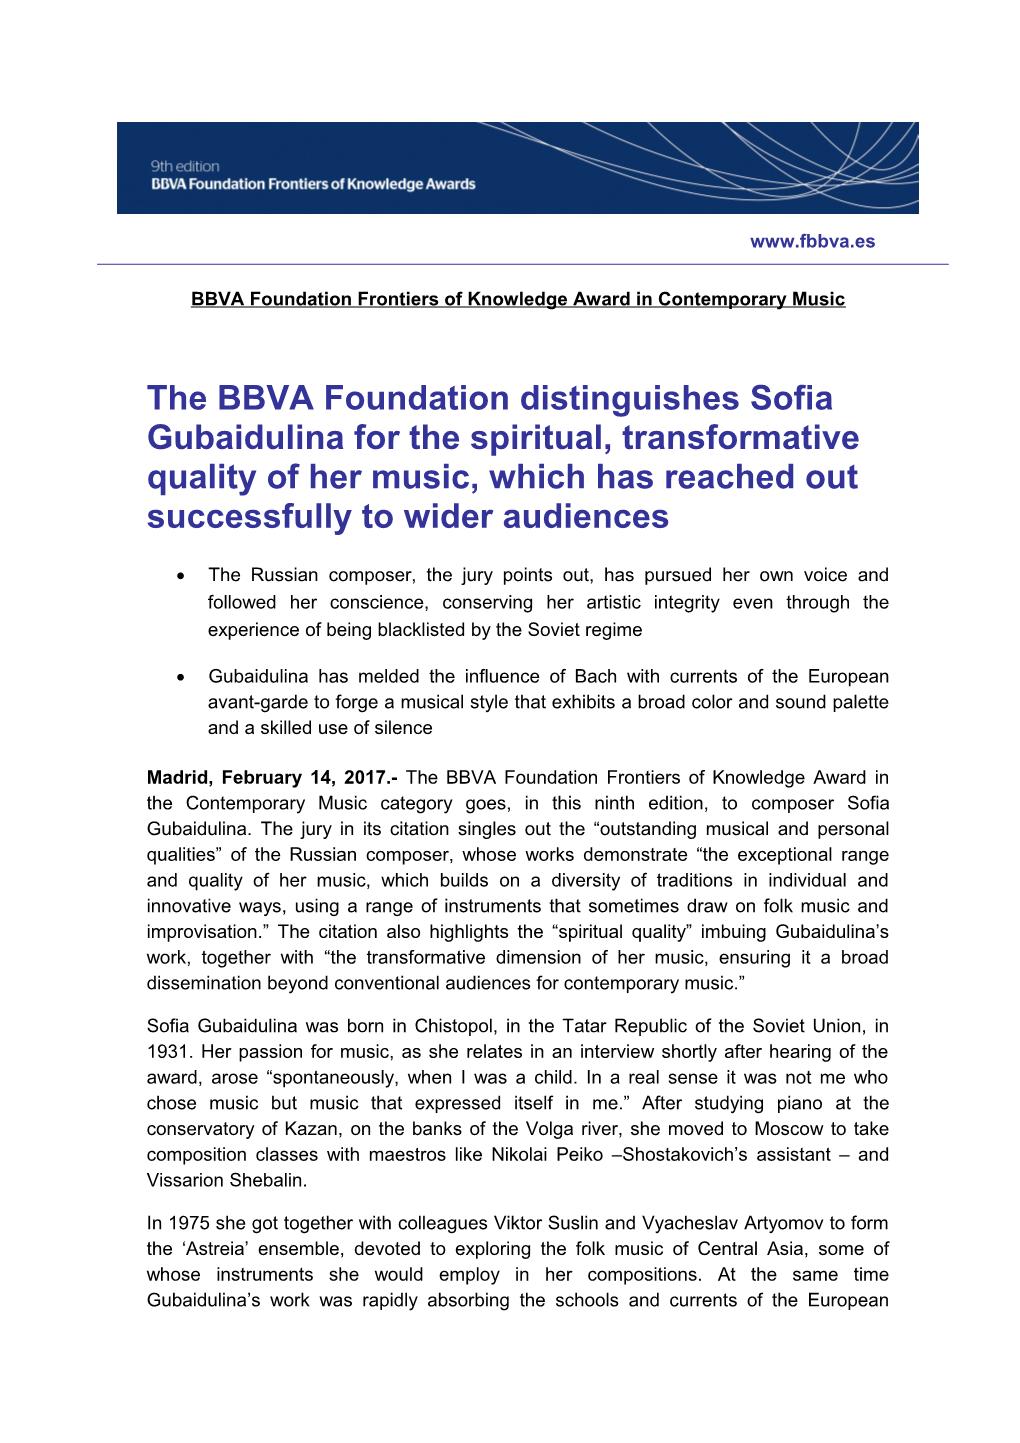 BBVA Foundation Frontiers of Knowledge Award in Contemporary Music